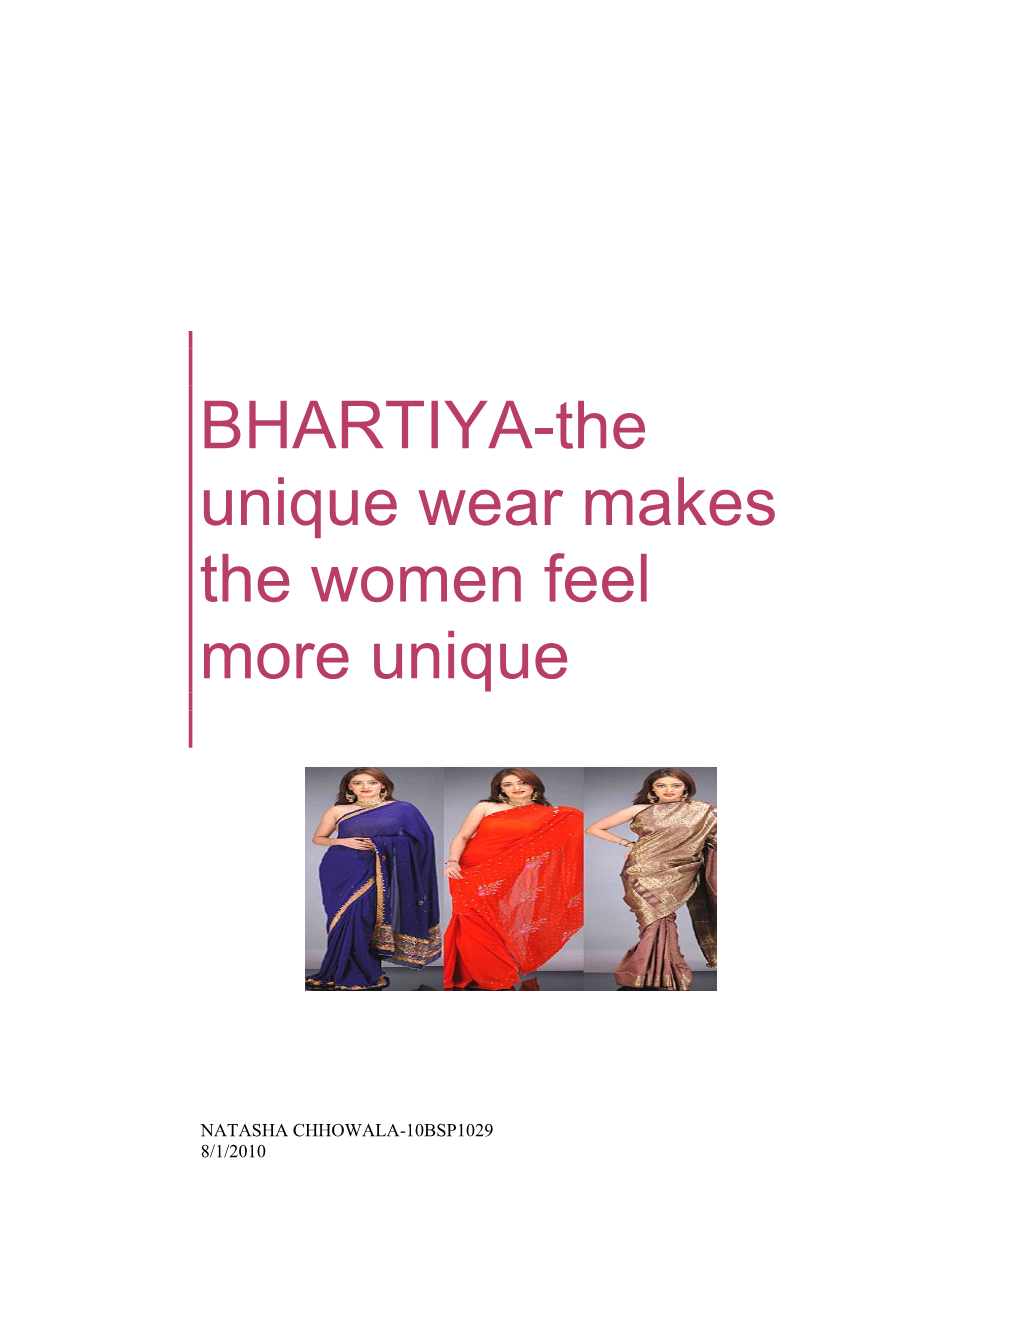 BHARTIYA-The Unique Wear Makes the Women Feel More Unique